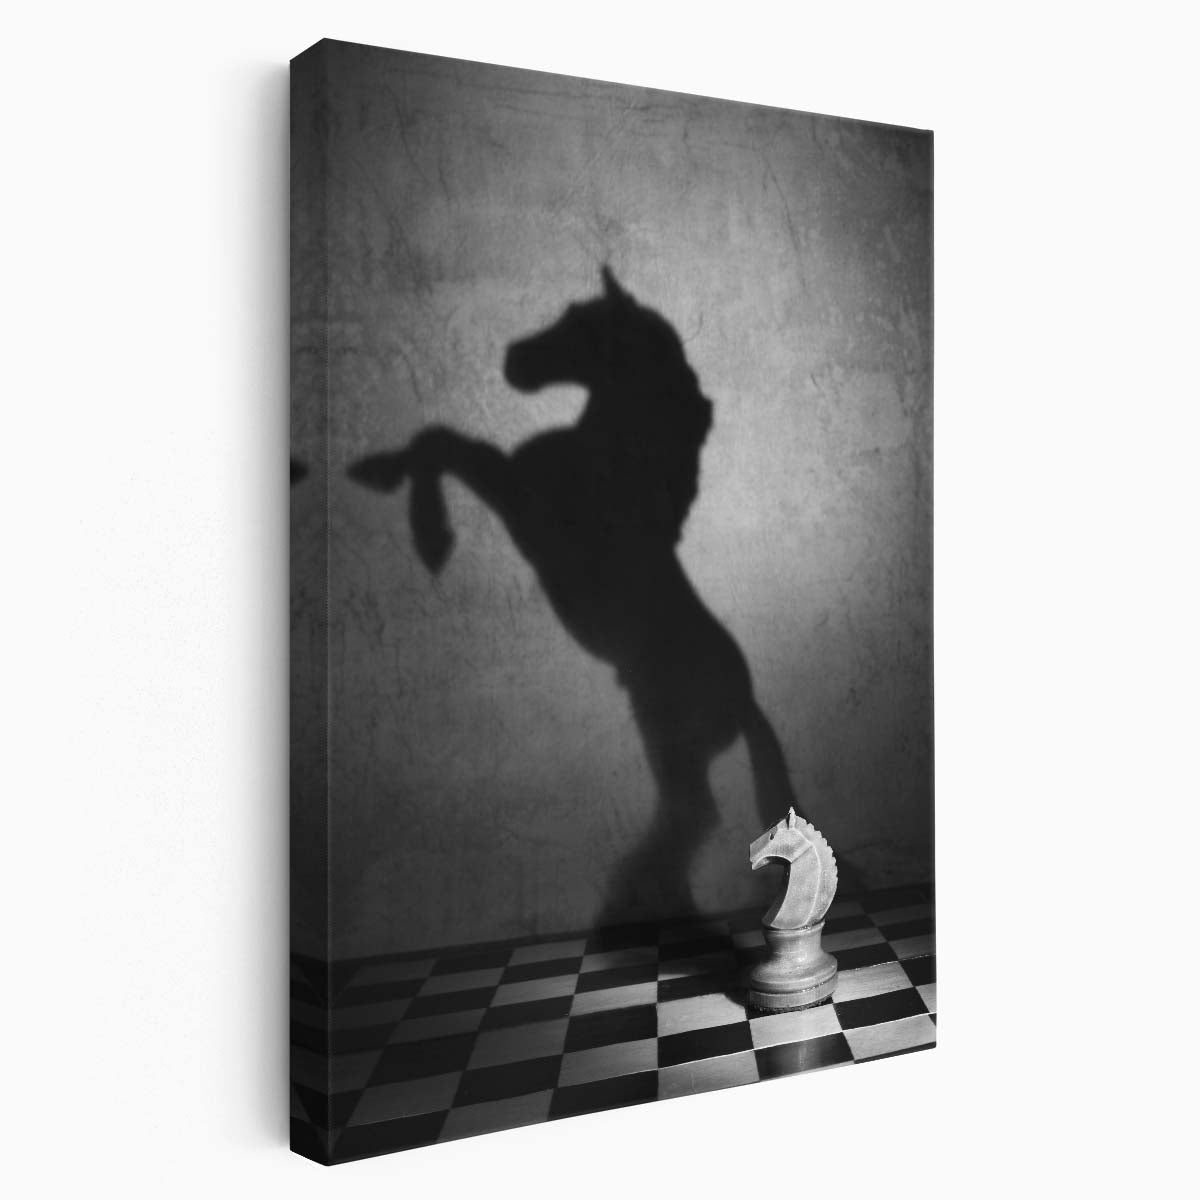 Monochrome Equestrian Chess Board Photography Wall Art by Luxuriance Designs, made in USA